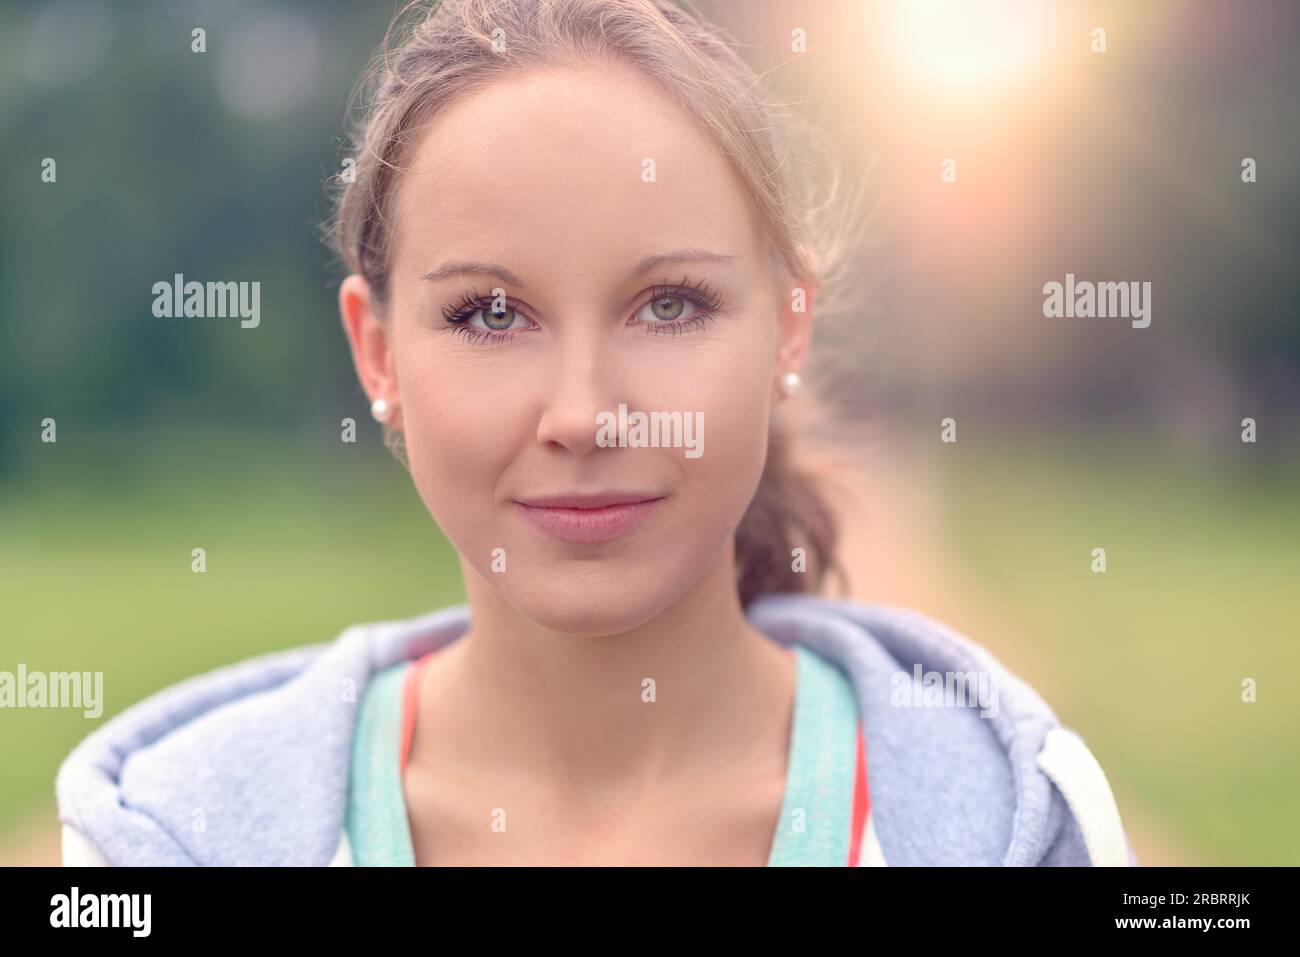 Close up Head and Shoulder Shot of a Fit Young Woman Looking at the Camera with a Toothy Smile Stock Photo